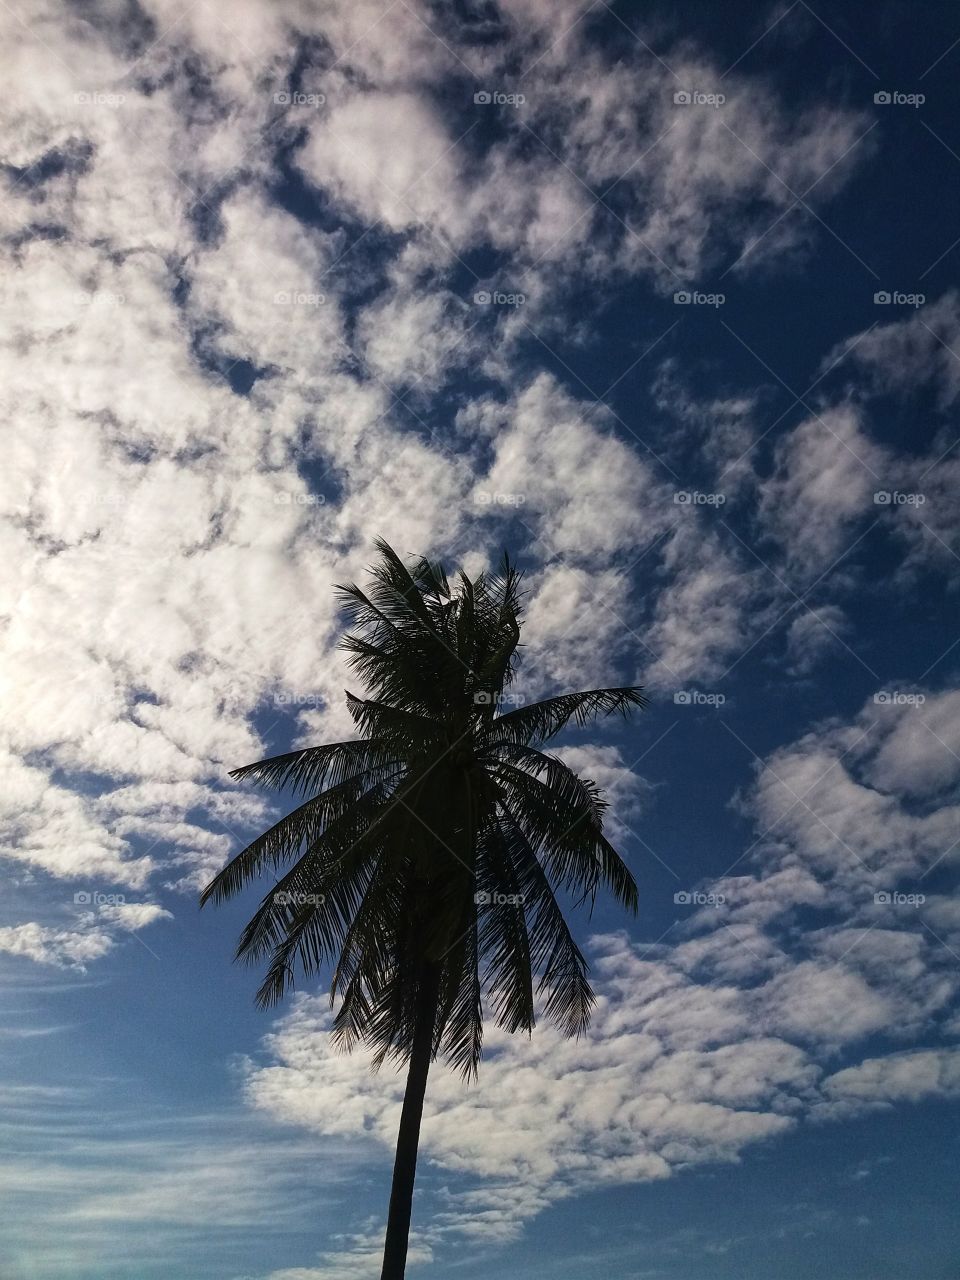 Coconut trees and beautiful sky views